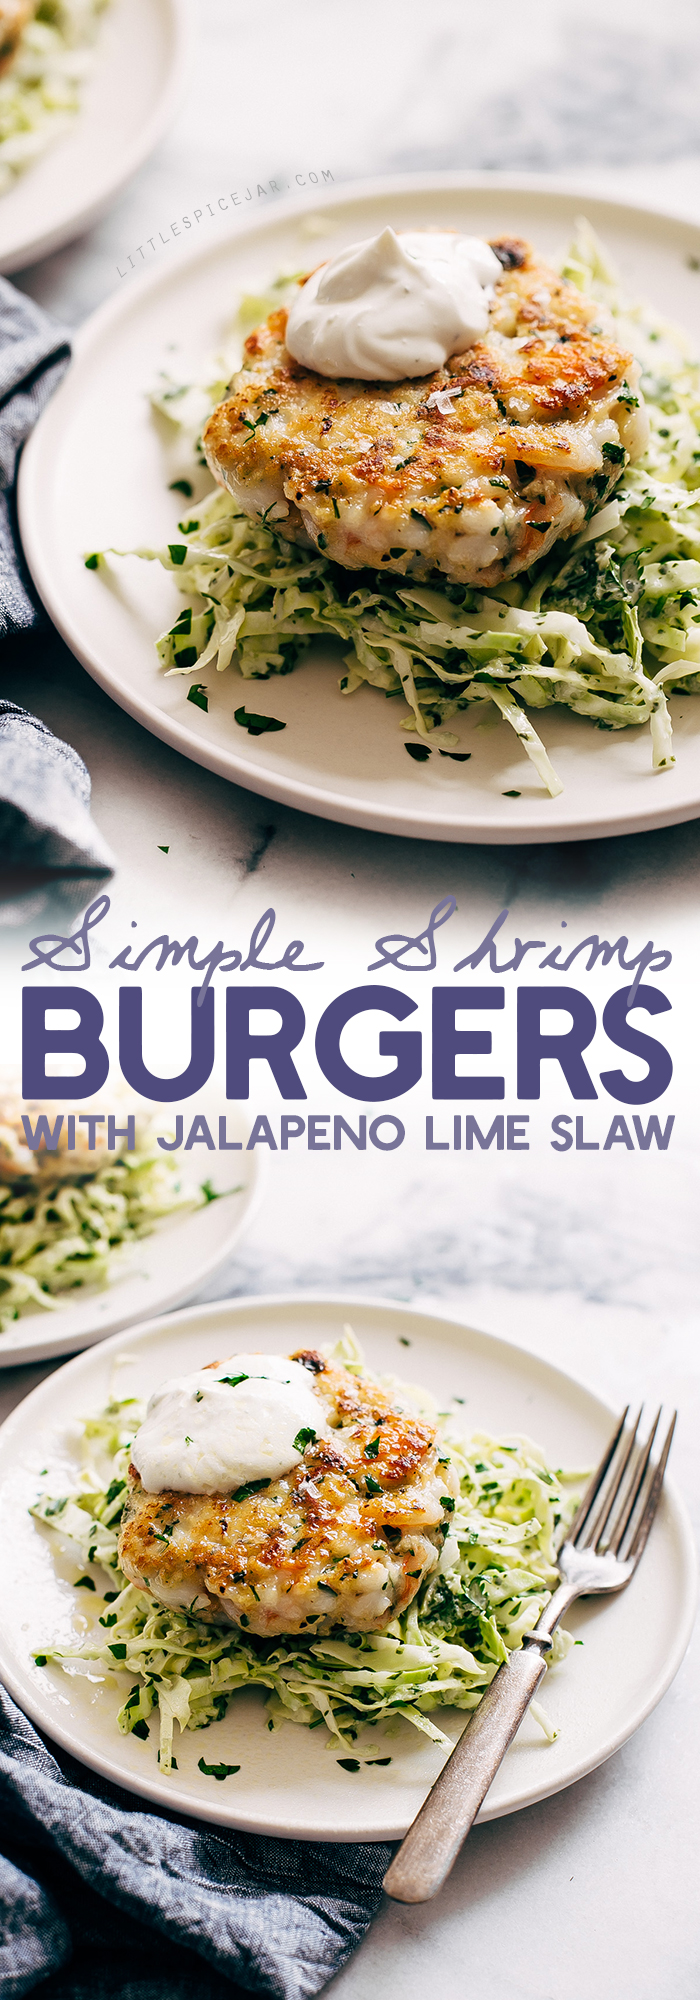 Simple Shrimp Burgers with Jalapeño Lime Slaw - these burgers take in the ballpark of 30 minutes to make. You can serve them on a bed of jalapeño lime slaw or on a brioche bun! Simple, healthy, and delicious! #seafood #shrimp #shrimpburgers #dinner #slaw | Littlespicejar.com